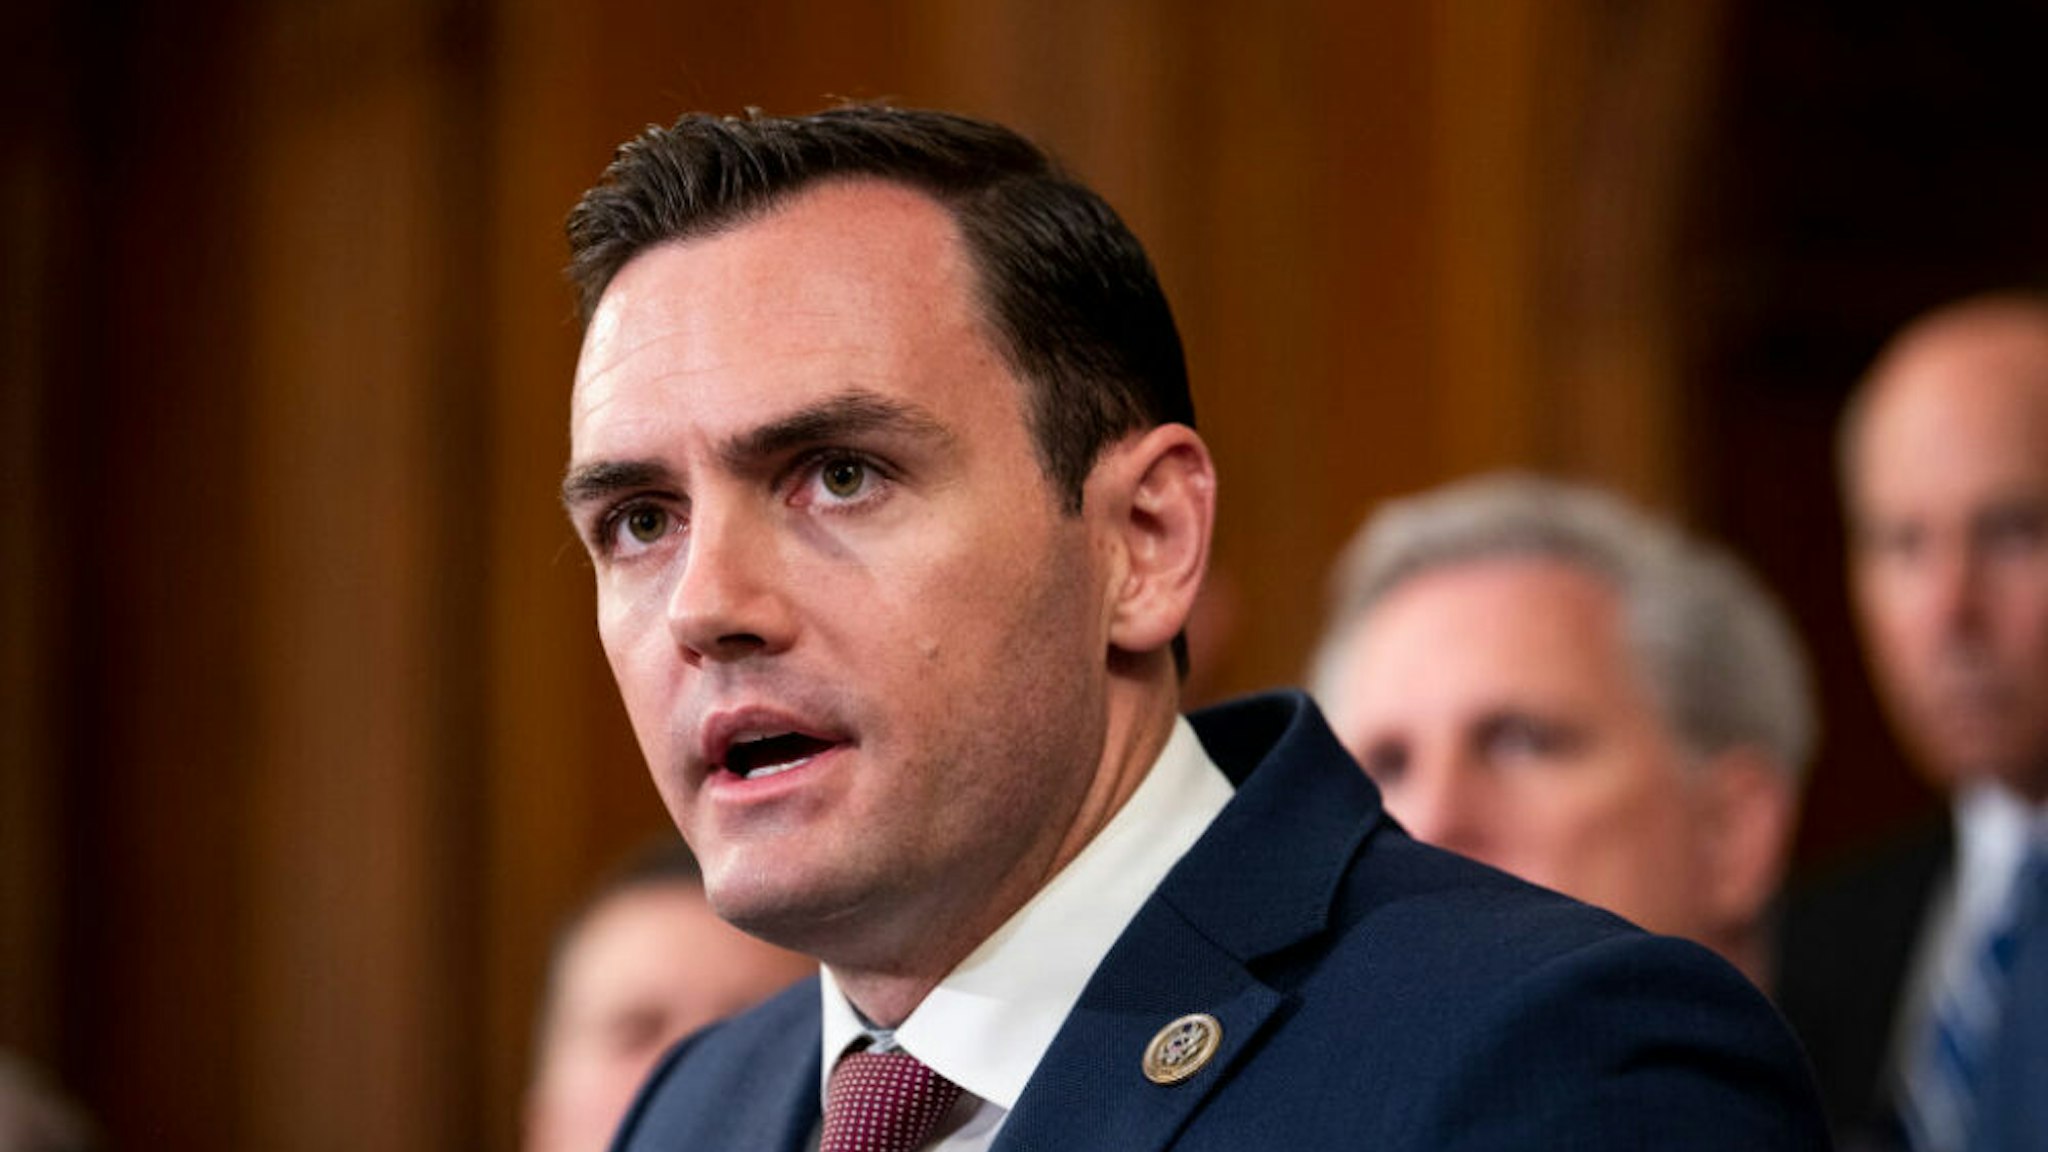 UNITED STATES - AUGUST 31: Rep. Mike Gallagher, R-Wisc., speaks during the House Republicans press conference on the U.S. military withdrawal from Afghanistan in the Rayburn Room in the U.S. Capitol on Tuesday, August 31, 2021.